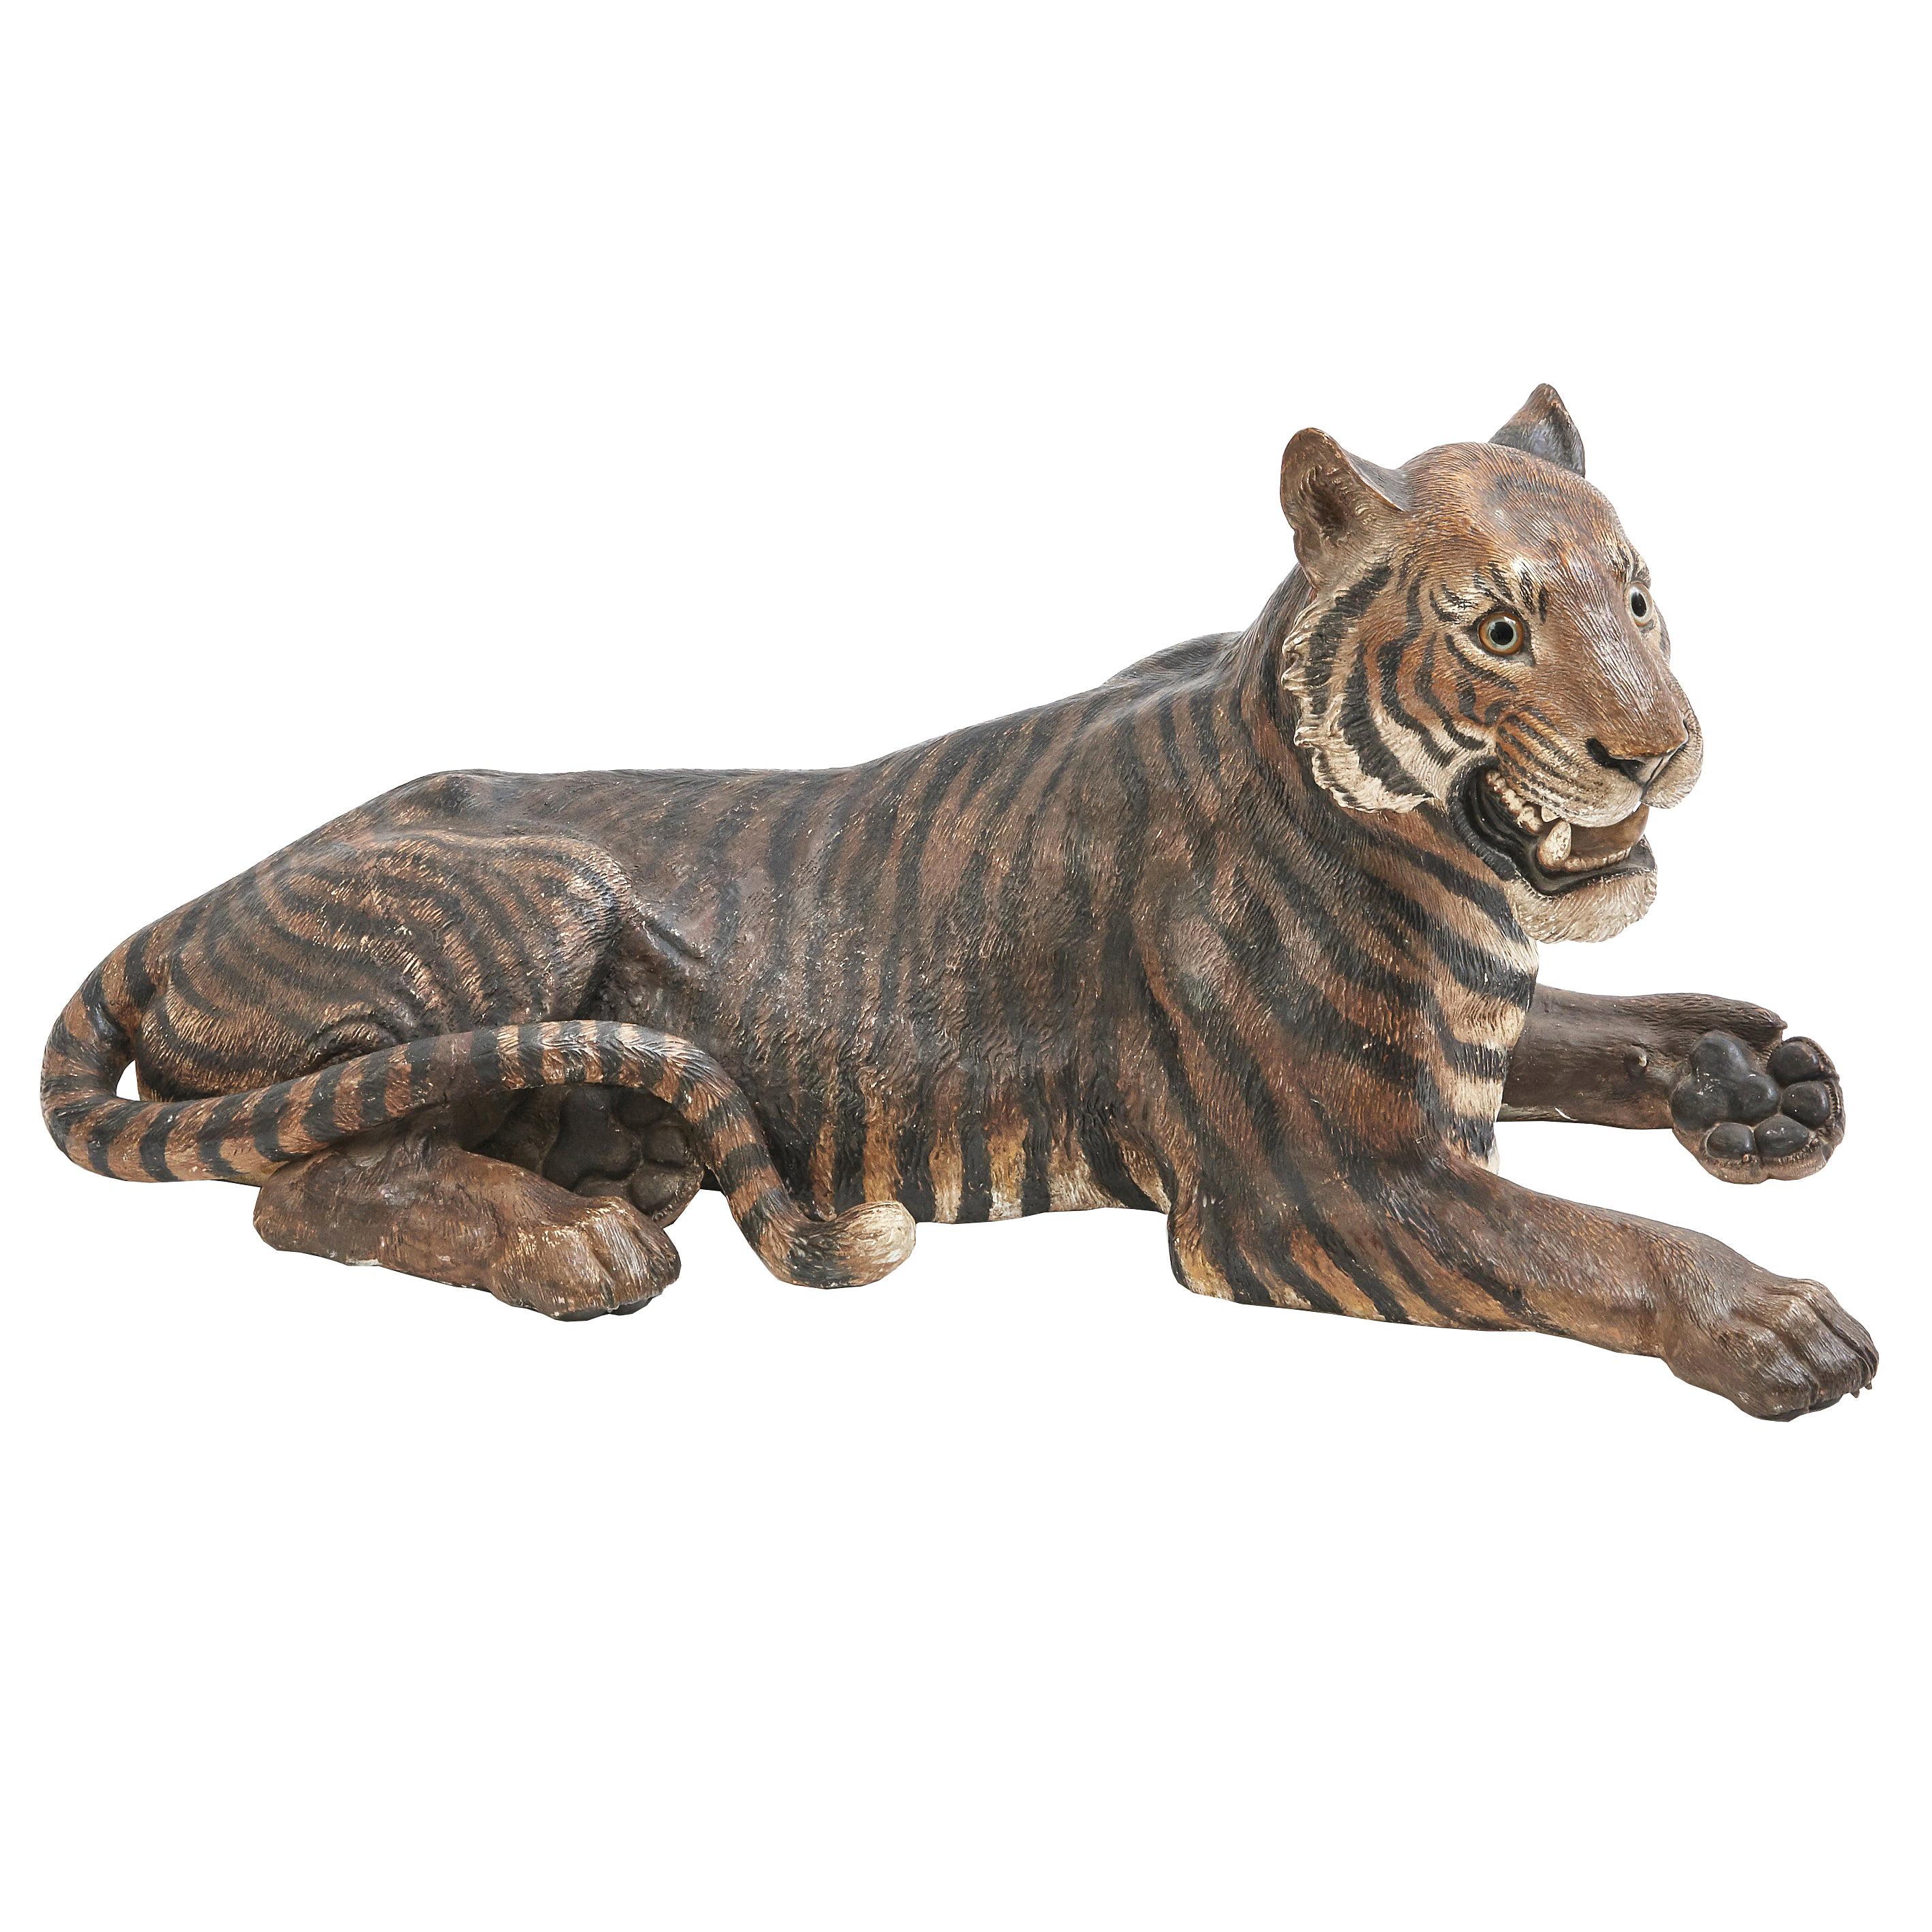 Austrian Large Cold Painted Terracotta Model of a Tiger, Late 19th Century